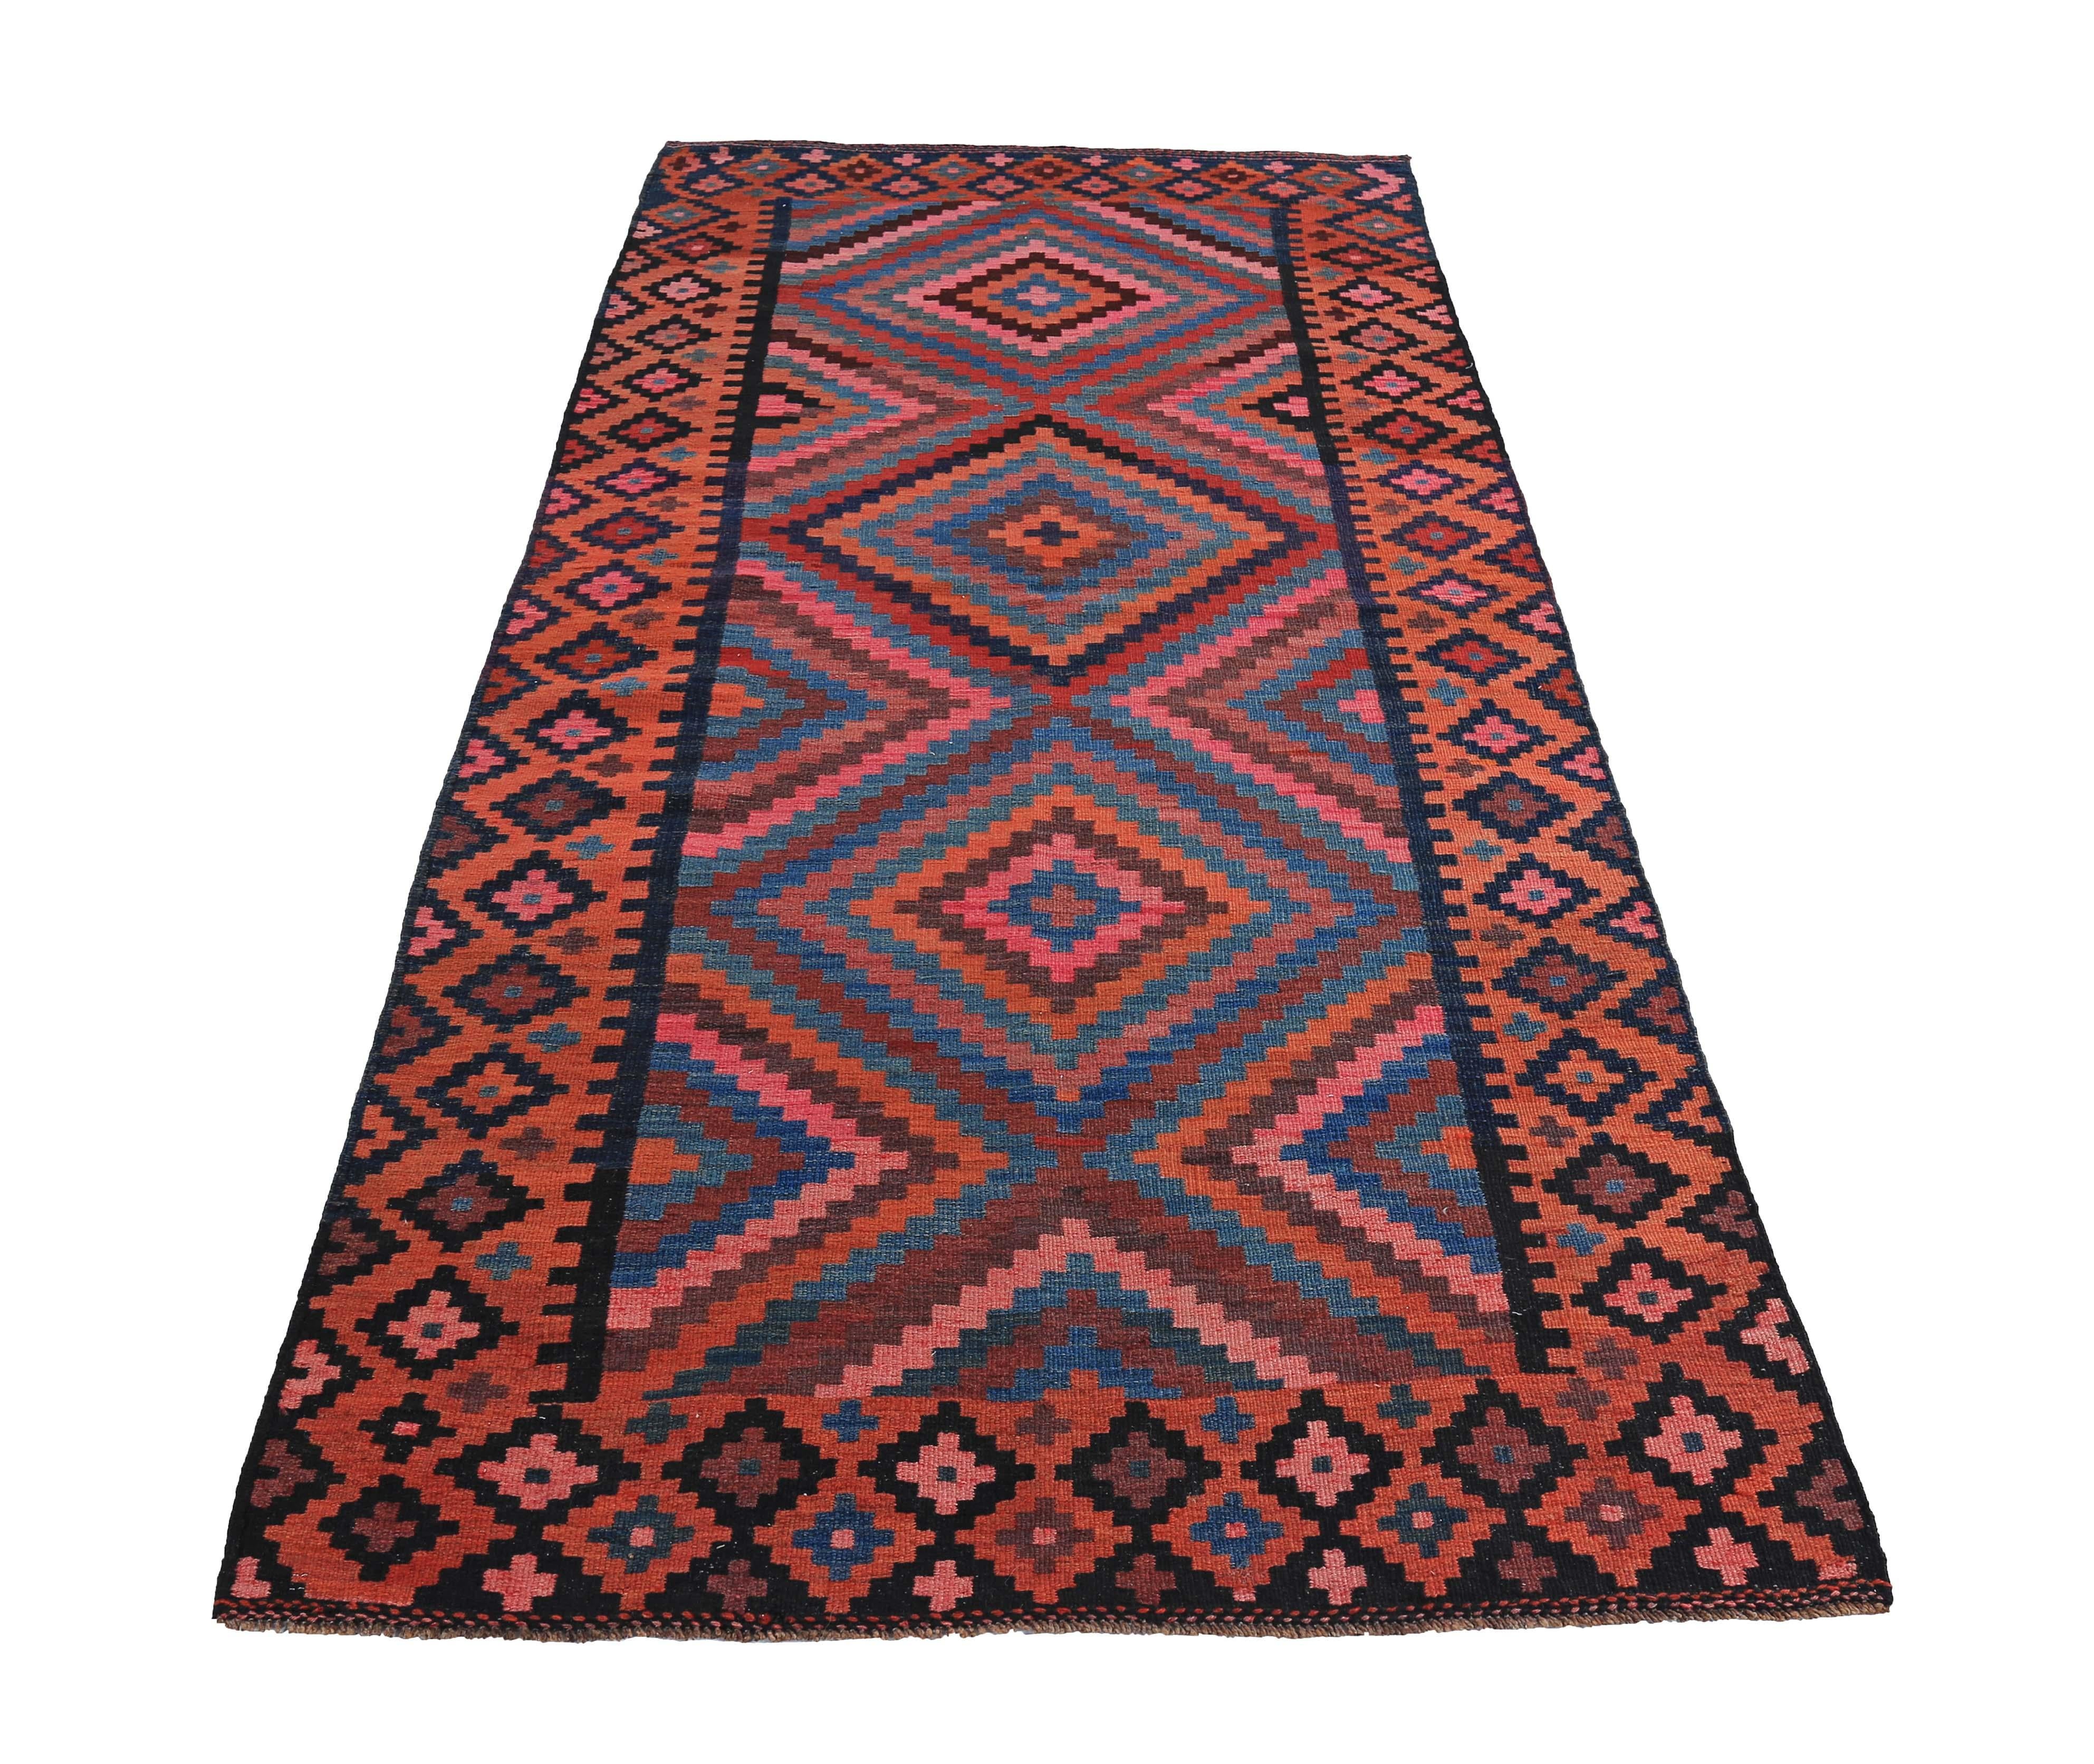 Turkish rug handwoven from the finest sheep’s wool and colored with all-natural vegetable dyes that are safe for humans and pets. It’s a traditional Kilim flat-weave design featuring red, pink and blue tribal design. It’s a stunning piece to get for